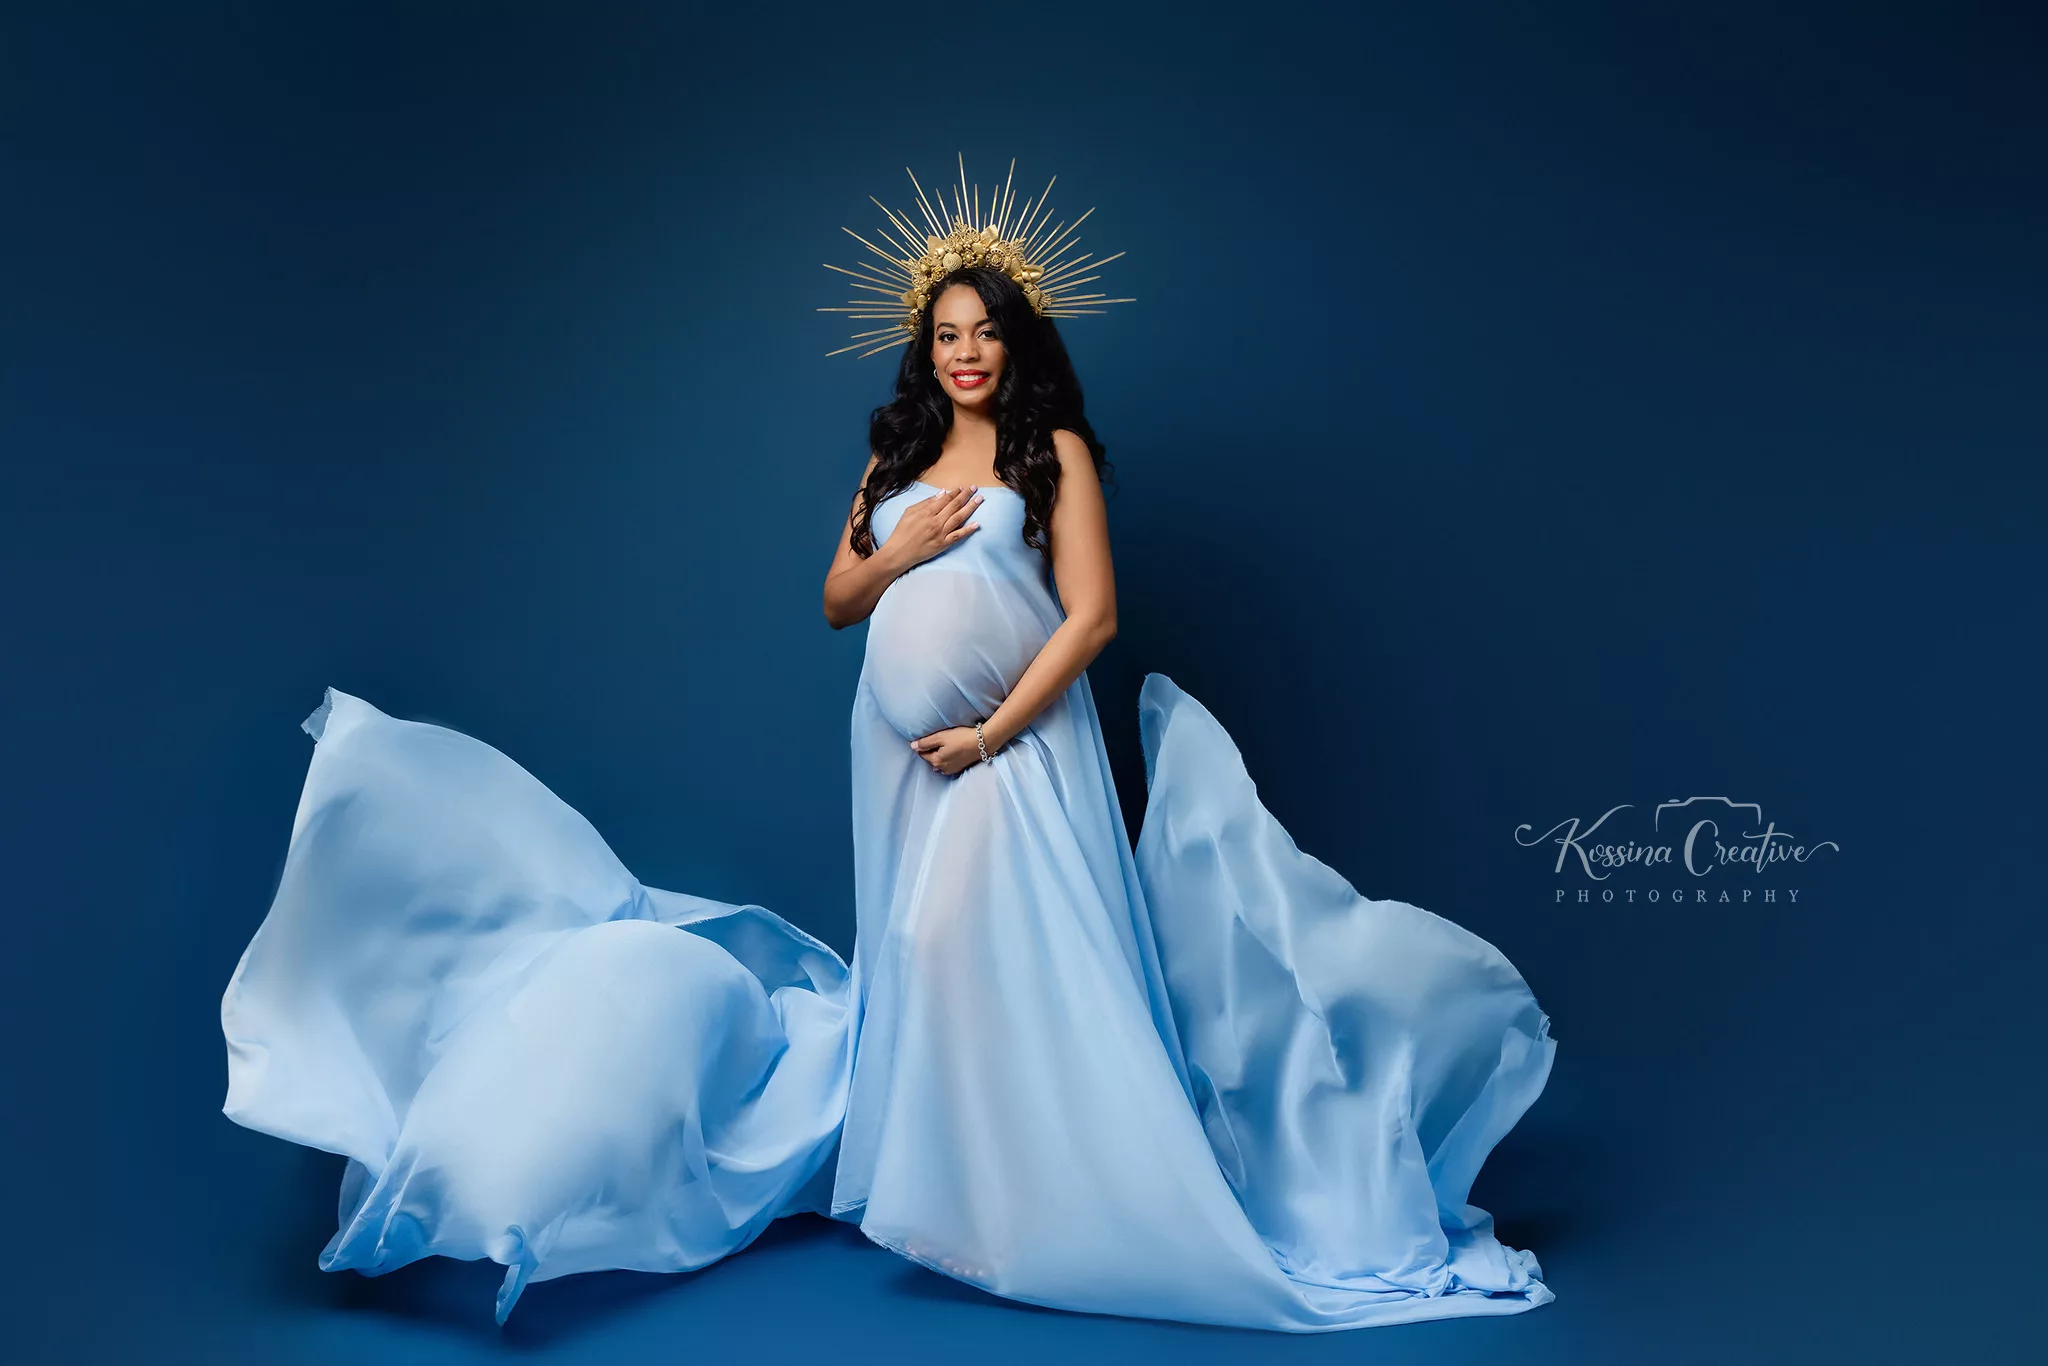 Orlando Maternity Photographer Photo Studio with blue background and gold crown